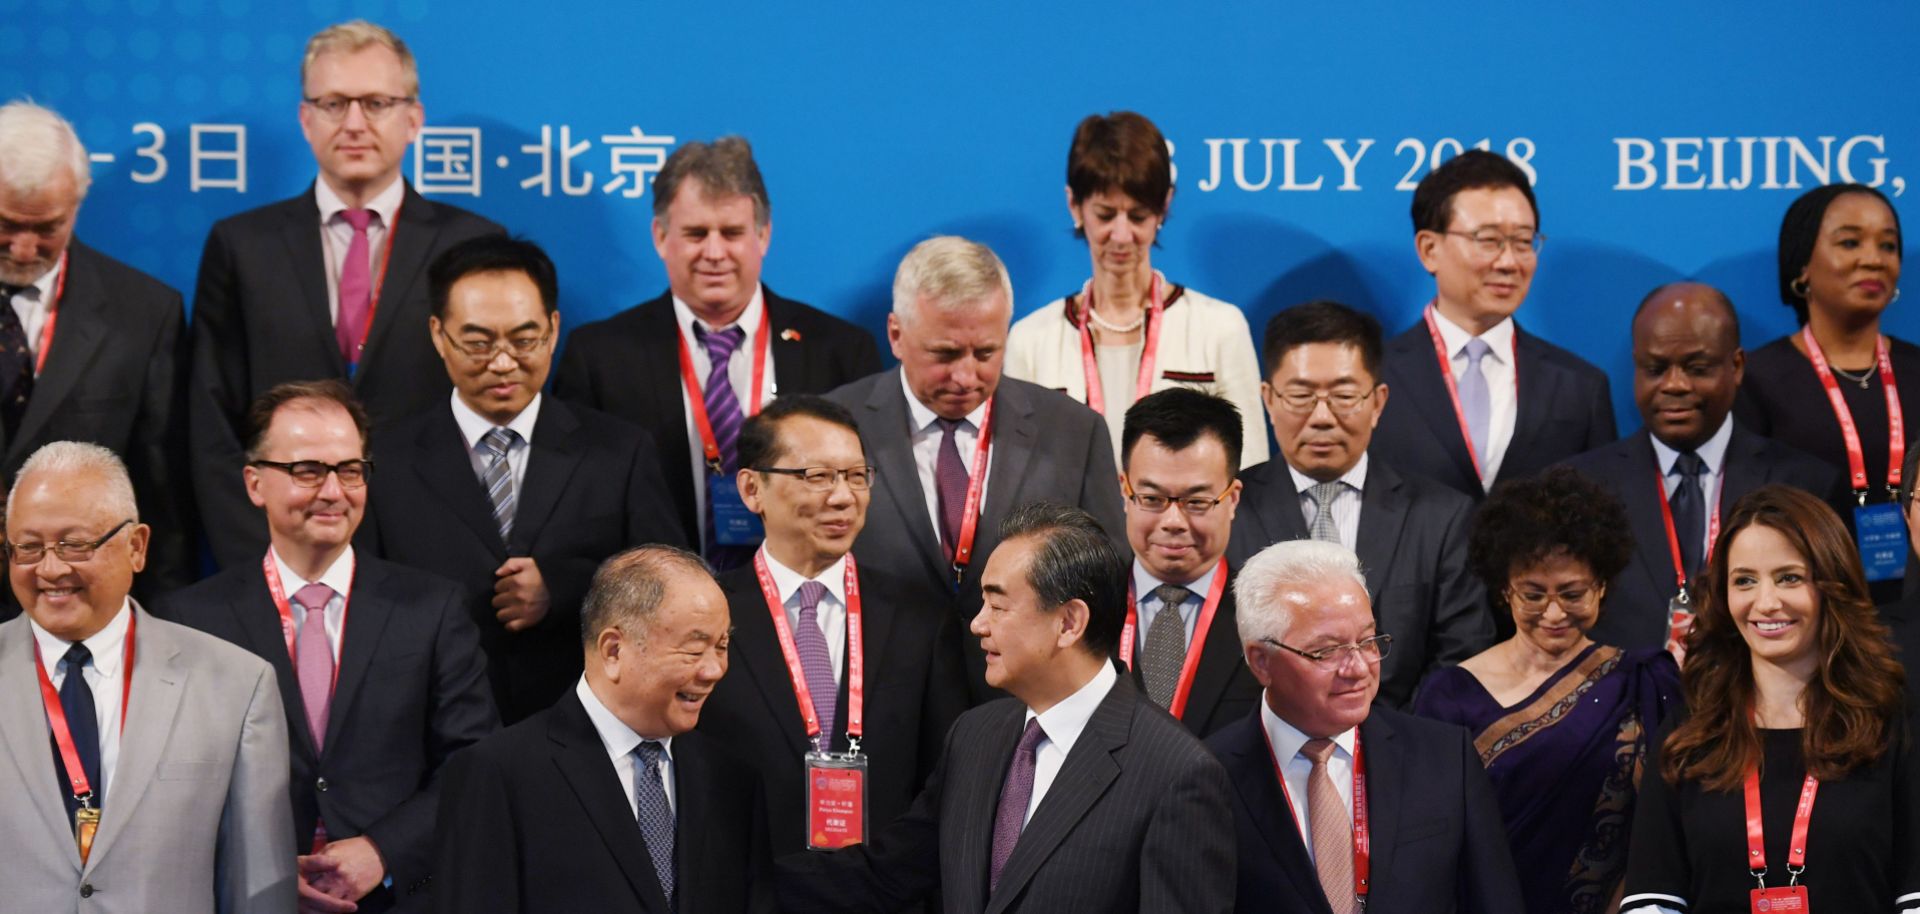 Chinese Foreign Minister Wang Yi, front center, stands with other delegates for a group photo before the Belt and Road Forum on Legal Cooperation began in Beijing on July 2, 2018.